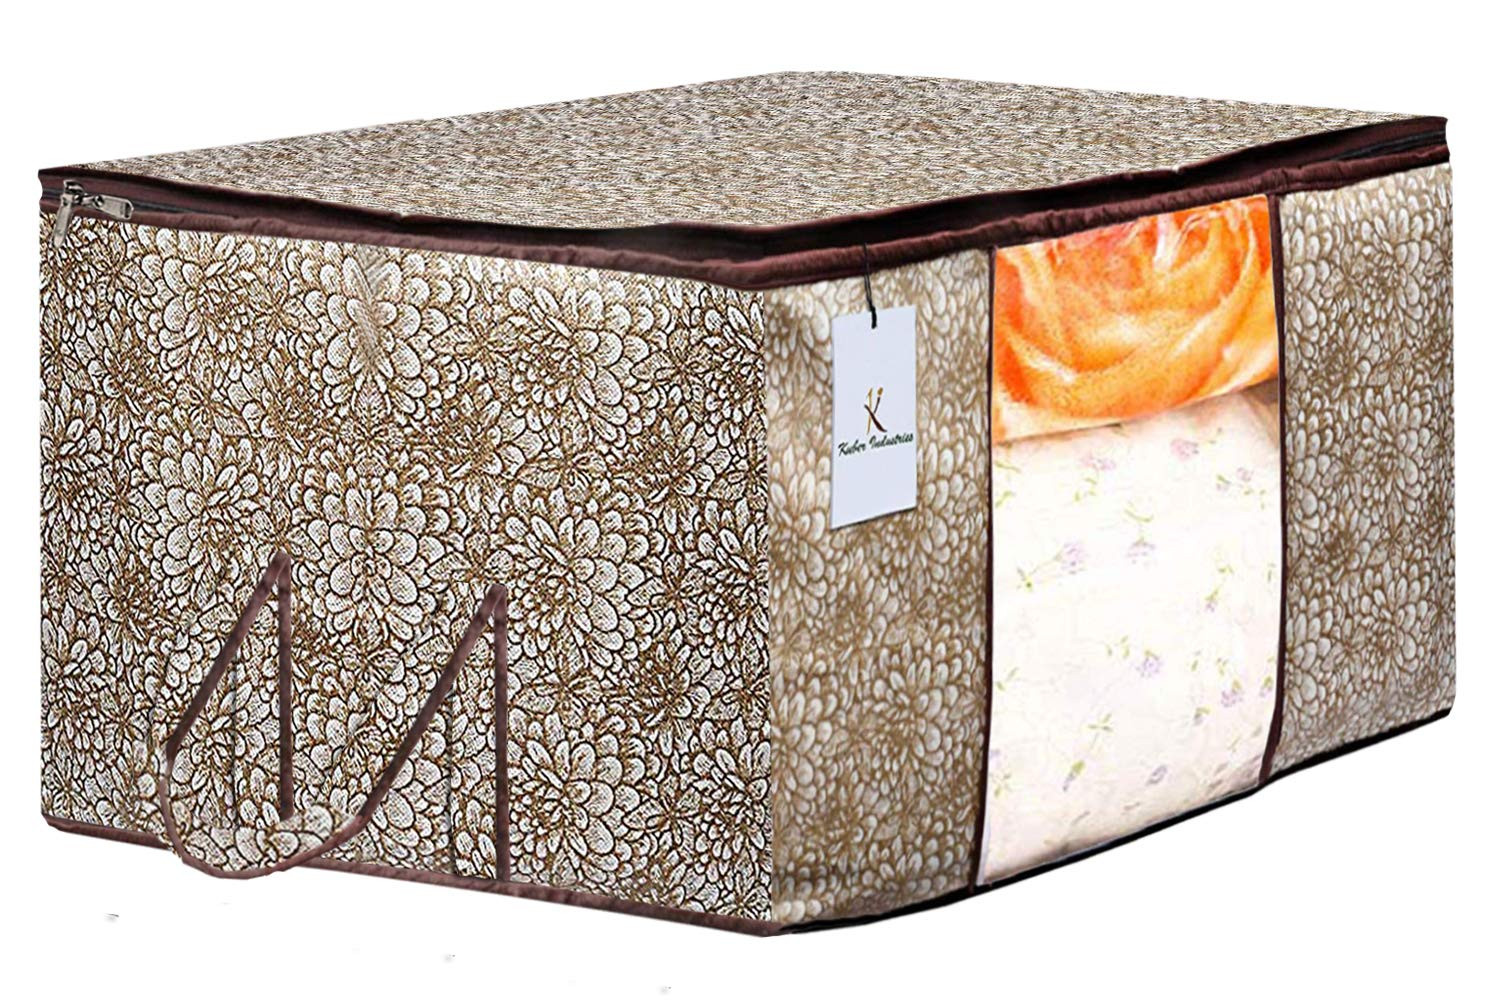 Kuber Industries Metalic Printed Non Woven Saree Cover And Underbed Storage Bag, Storage Organiser, Blanket Cover, Golden Brown & Red  -CTKTC42377